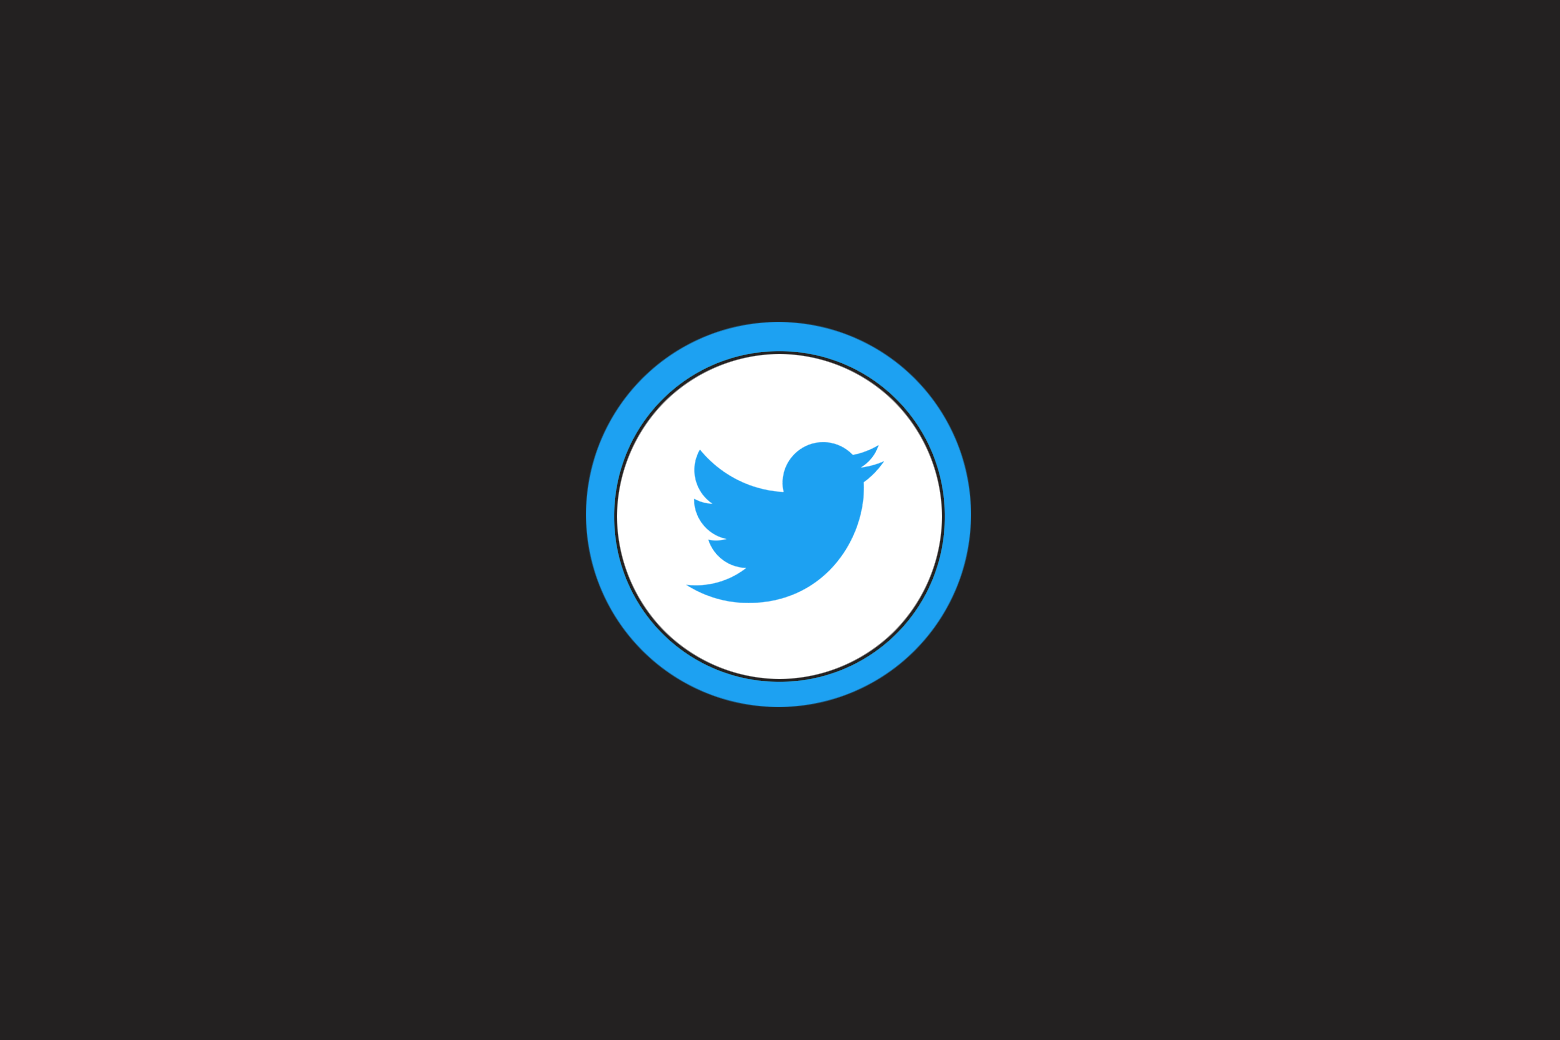 A Twitter bird slowly disappearing in a circle.